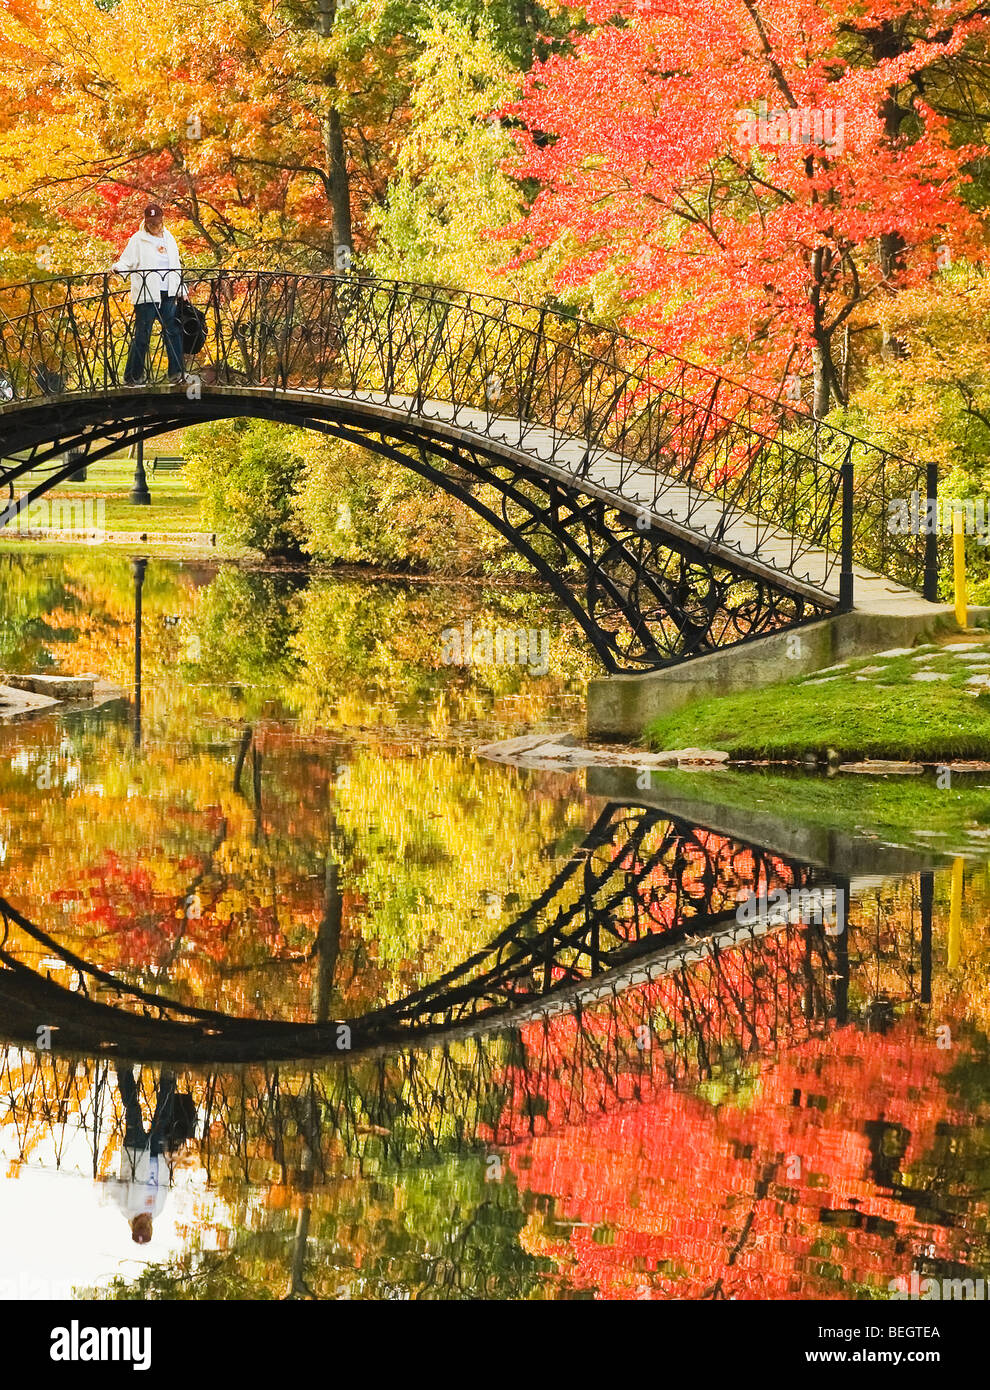 The bridge in Elm Park on a fall Day Stock Photo